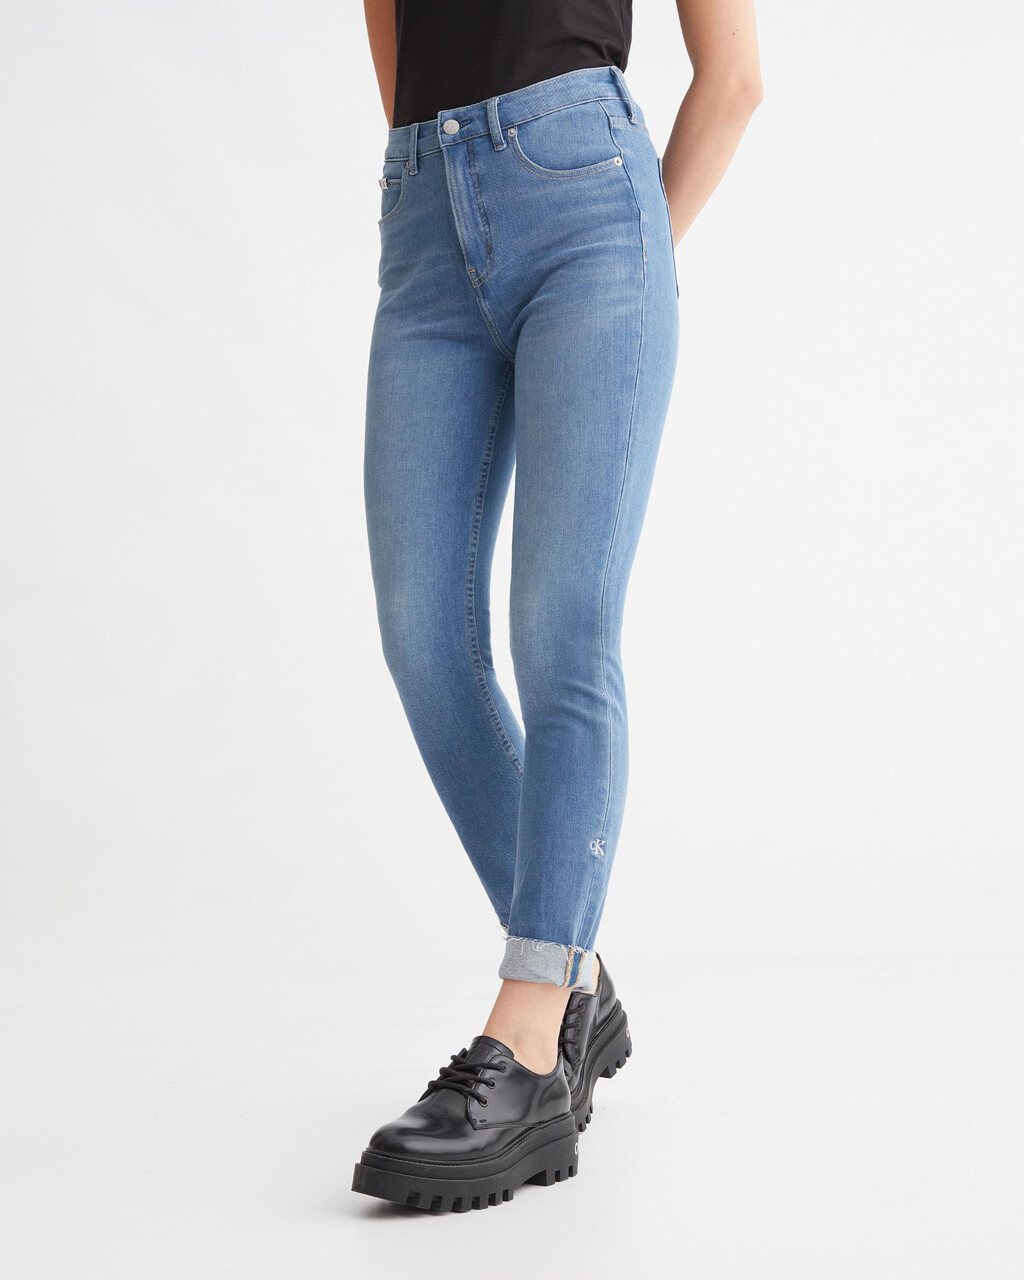 ULTIMATE STRETCH HIGH RISE SKINNY ANKLE JEANS, Bright Blue Embro Raw Hem, hi-res